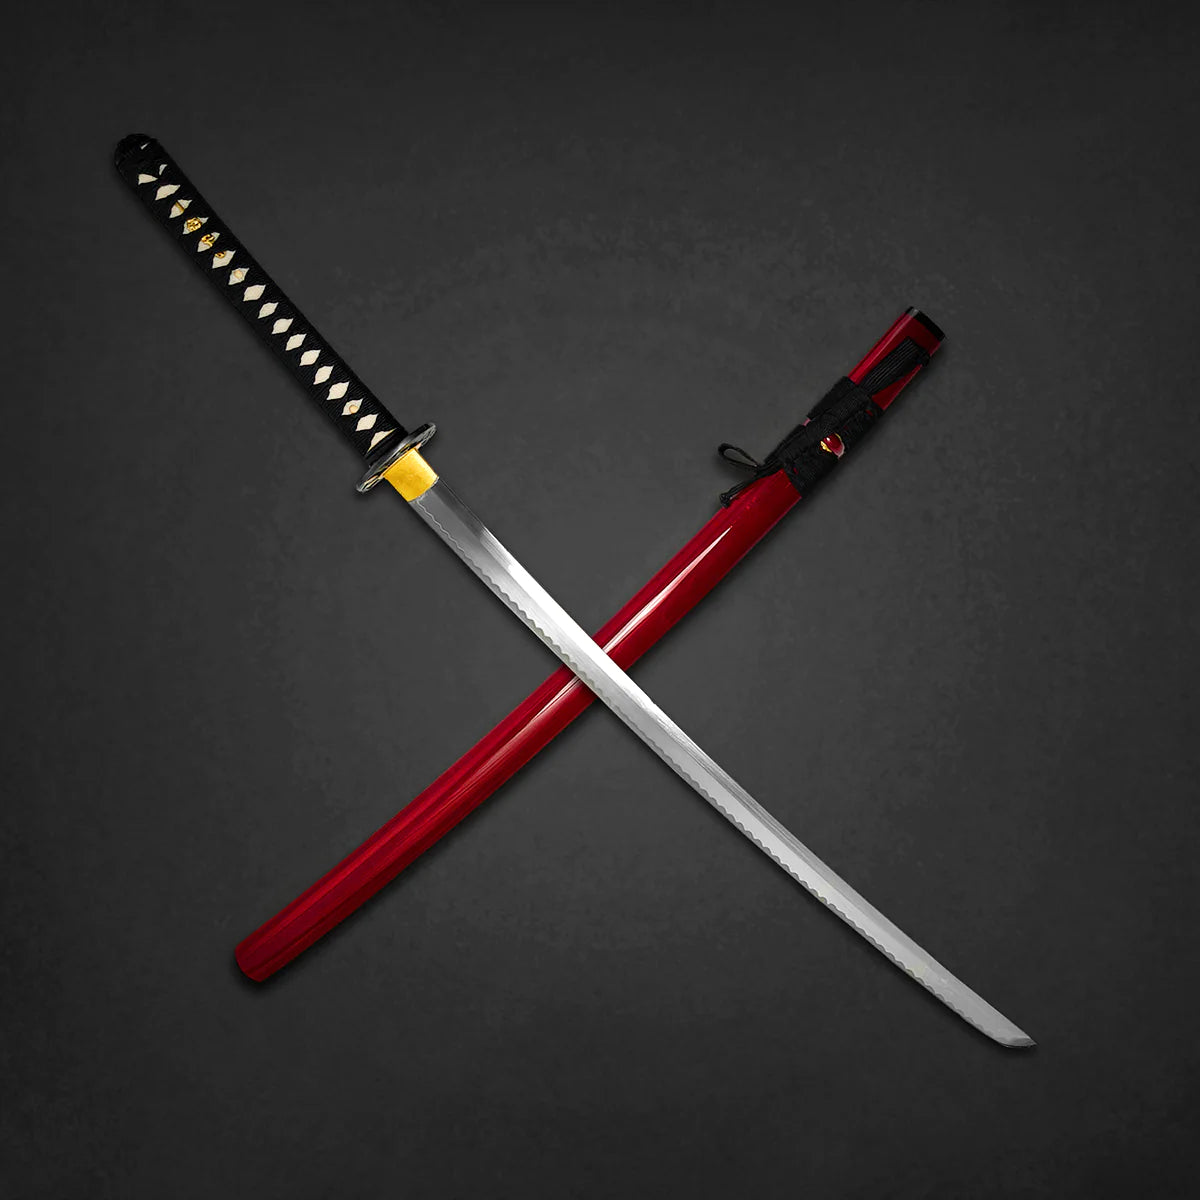 41" 1095 High Carbon Steel Premium Hand Forged Samurai Sword W/Gift Box and Bag